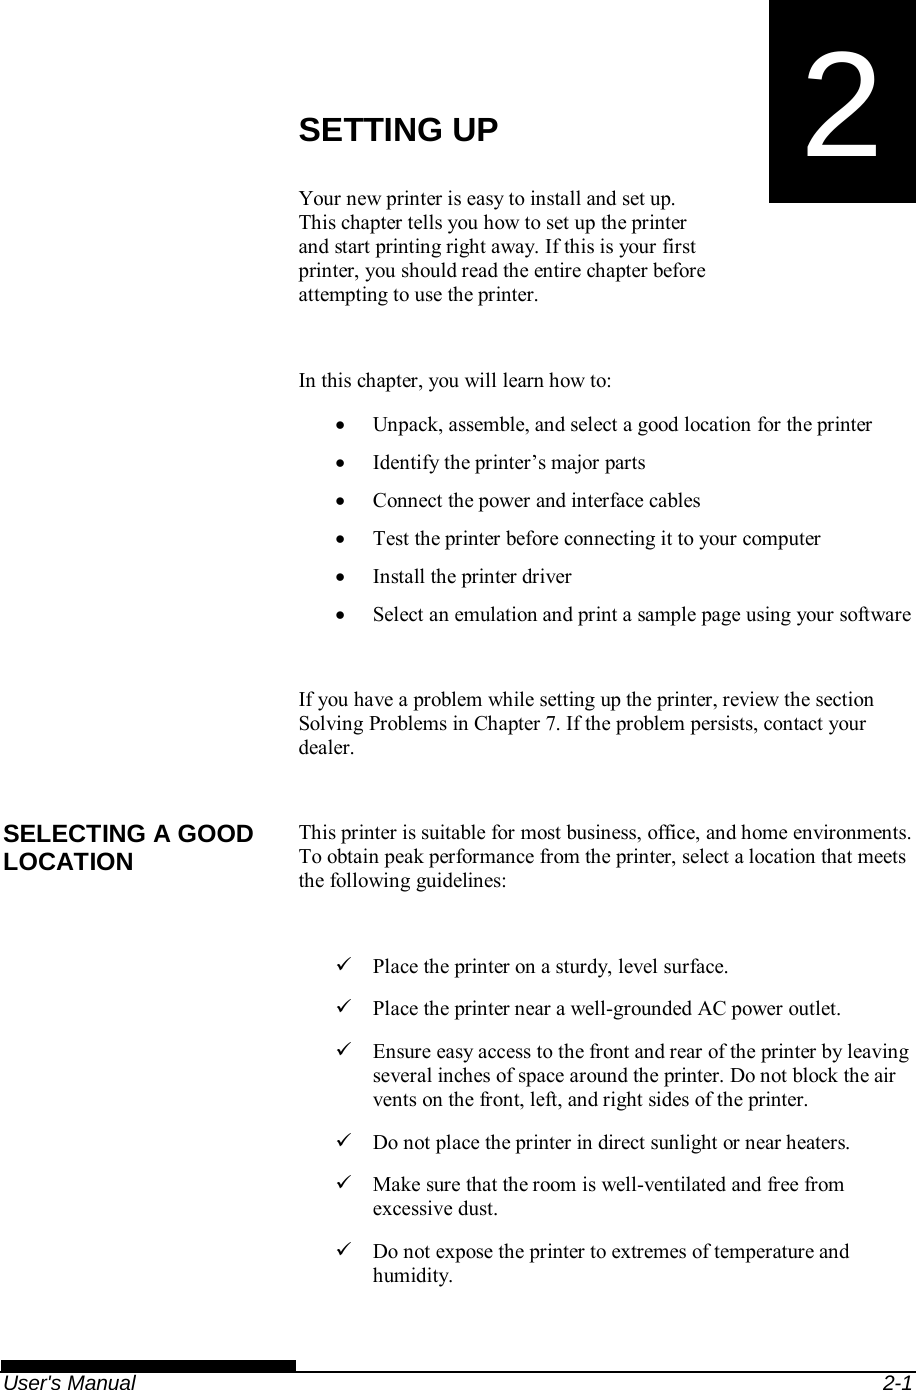   User&apos;s Manual  2-1 2  CHAPTER 2  SETTING UP SETTING UP Your new printer is easy to install and set up.  This chapter tells you how to set up the printer and start printing right away. If this is your first printer, you should read the entire chapter before attempting to use the printer.  In this chapter, you will learn how to:   Unpack, assemble, and select a good location for the printer   Identify the printer’s major parts   Connect the power and interface cables   Test the printer before connecting it to your computer   Install the printer driver   Select an emulation and print a sample page using your software  If you have a problem while setting up the printer, review the section Solving Problems in Chapter 7. If the problem persists, contact your dealer.  This printer is suitable for most business, office, and home environments. To obtain peak performance from the printer, select a location that meets the following guidelines:    Place the printer on a sturdy, level surface.   Place the printer near a well-grounded AC power outlet.   Ensure easy access to the front and rear of the printer by leaving several inches of space around the printer. Do not block the air vents on the front, left, and right sides of the printer.   Do not place the printer in direct sunlight or near heaters.   Make sure that the room is well-ventilated and free from excessive dust.   Do not expose the printer to extremes of temperature and humidity. SELECTING A GOOD LOCATION 